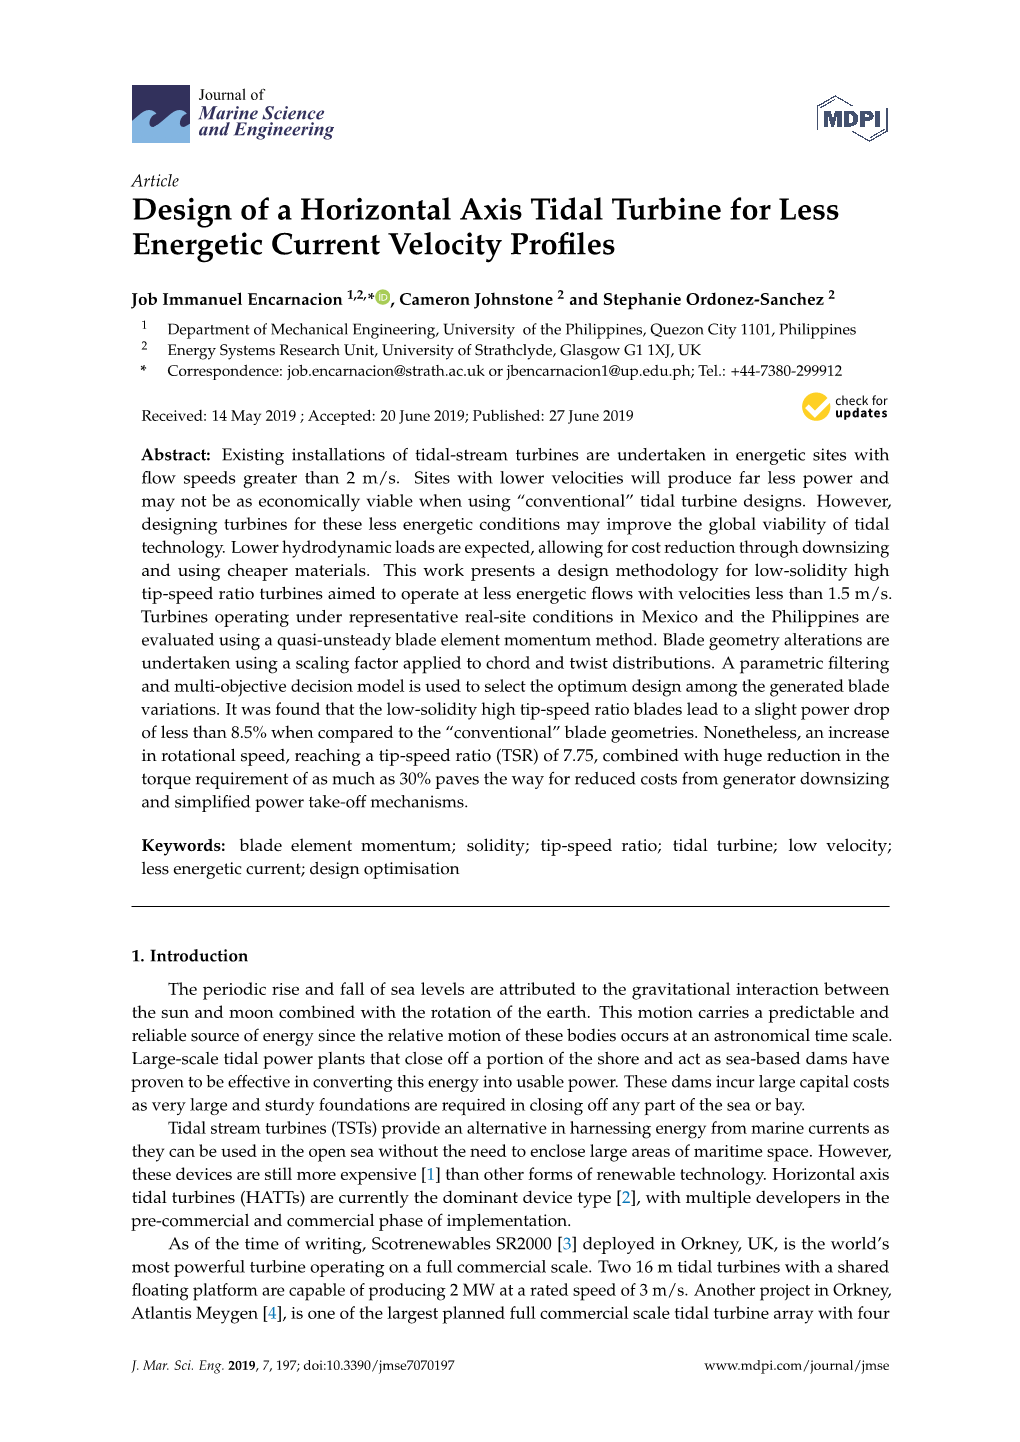 Design of a Horizontal Axis Tidal Turbine for Less Energetic Current Velocity Profiles